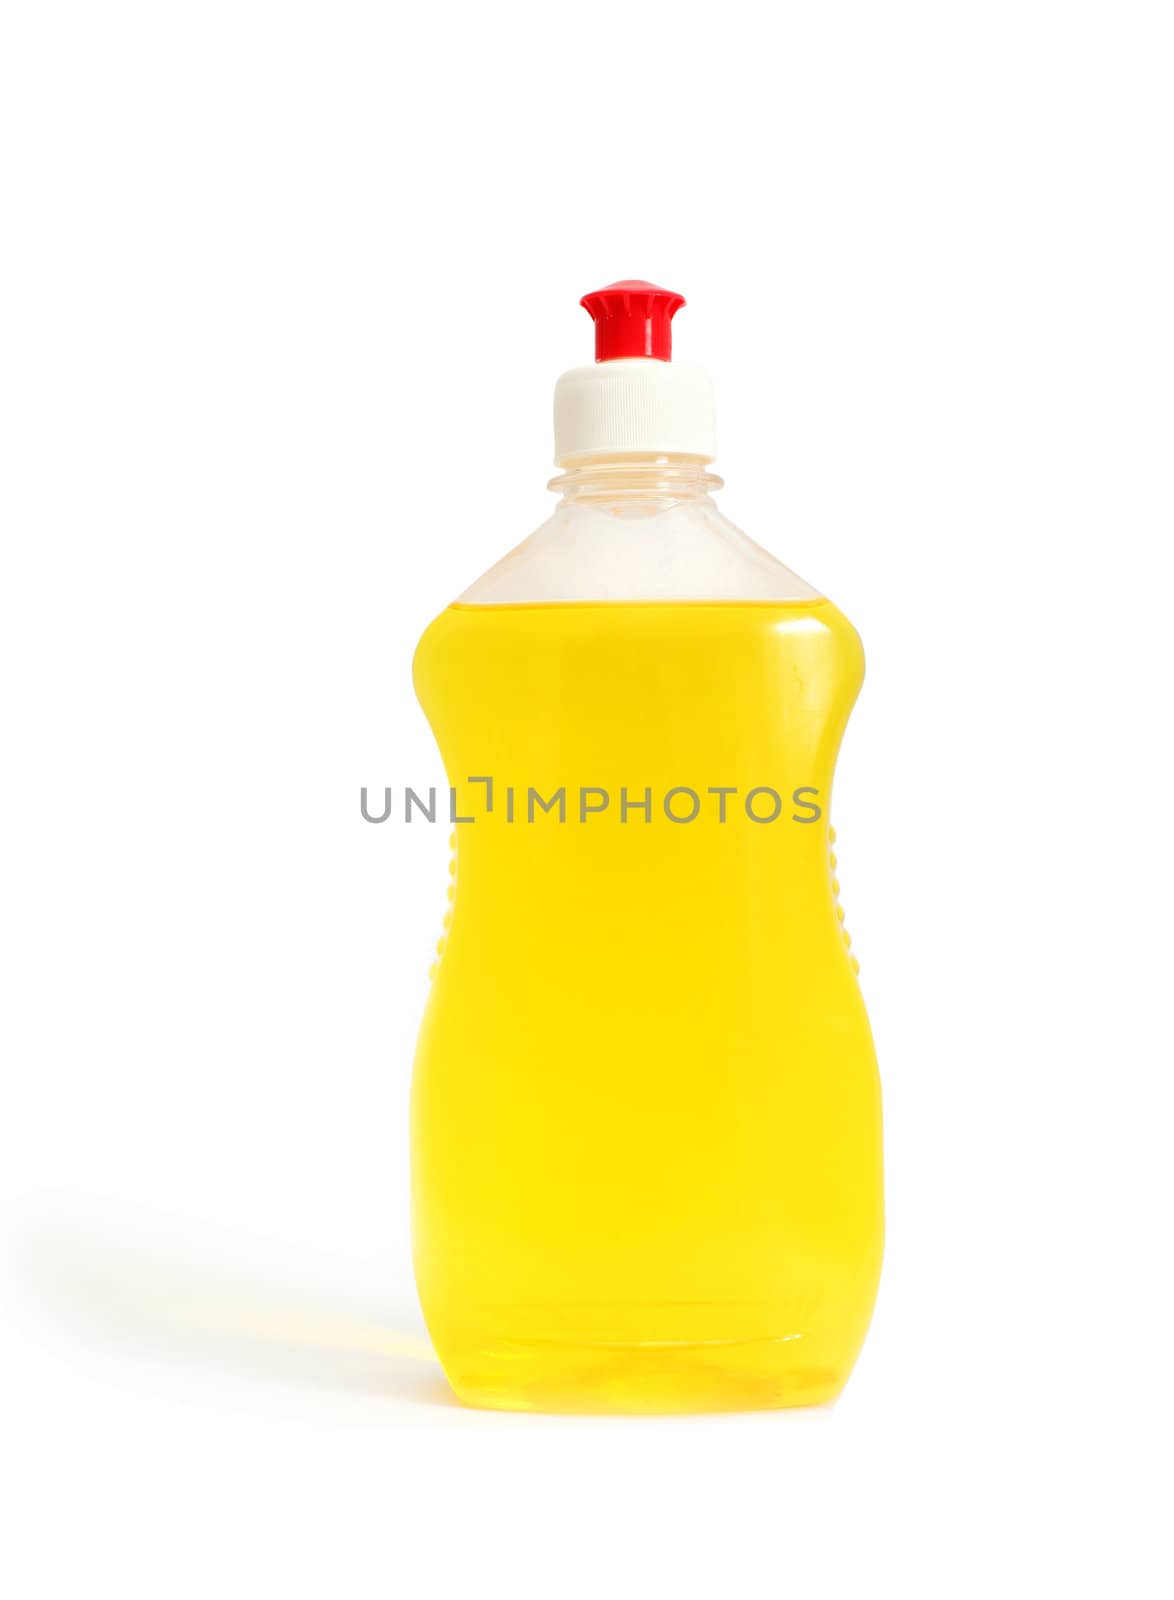 An image of a bright yellow bottle 